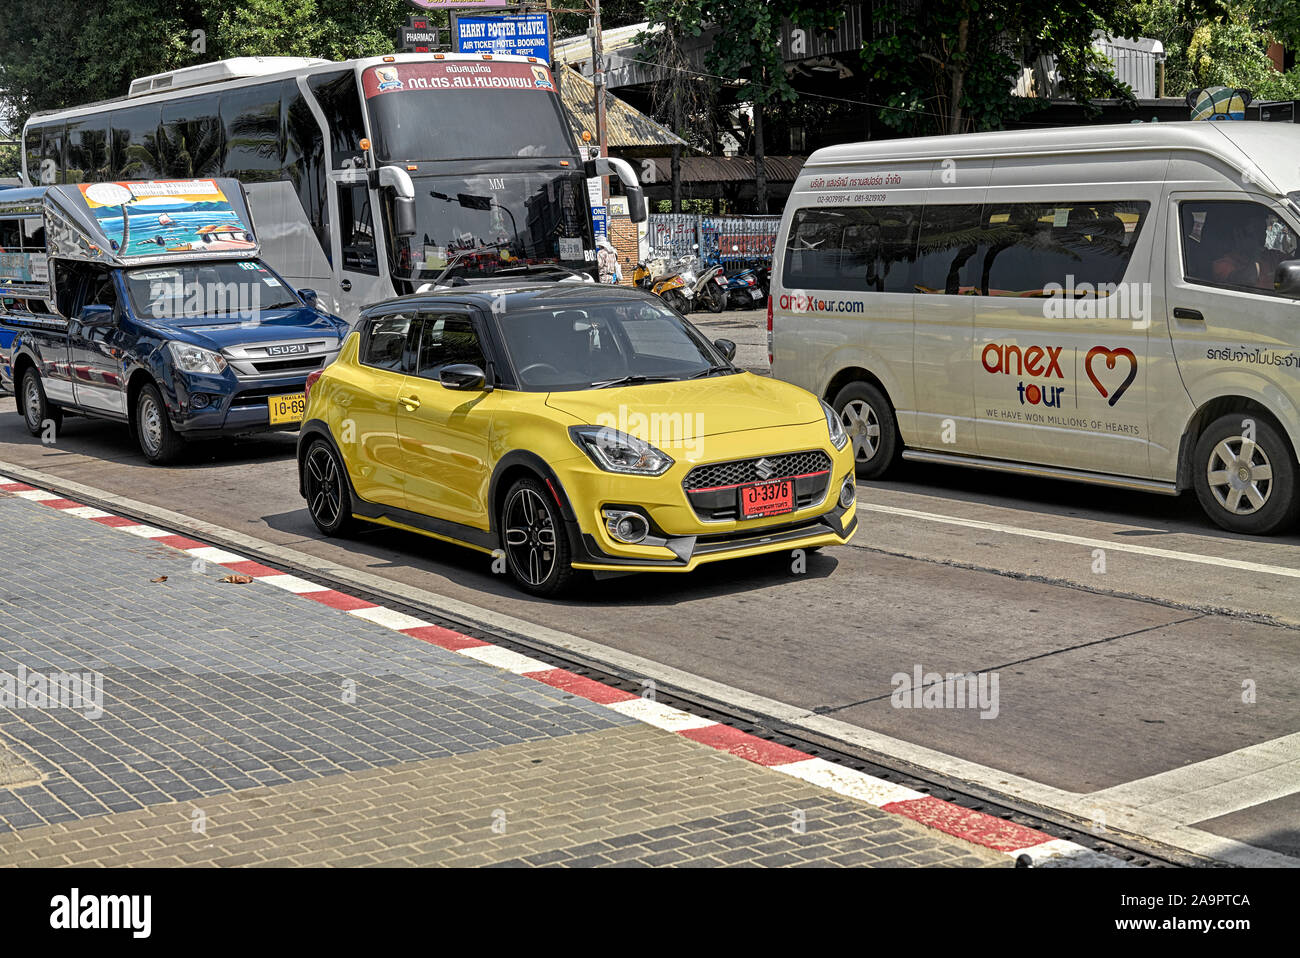 Suzuki Swift yellow compact Japanese car with Thailand red number plate signifying a new vehicle Stock Photo